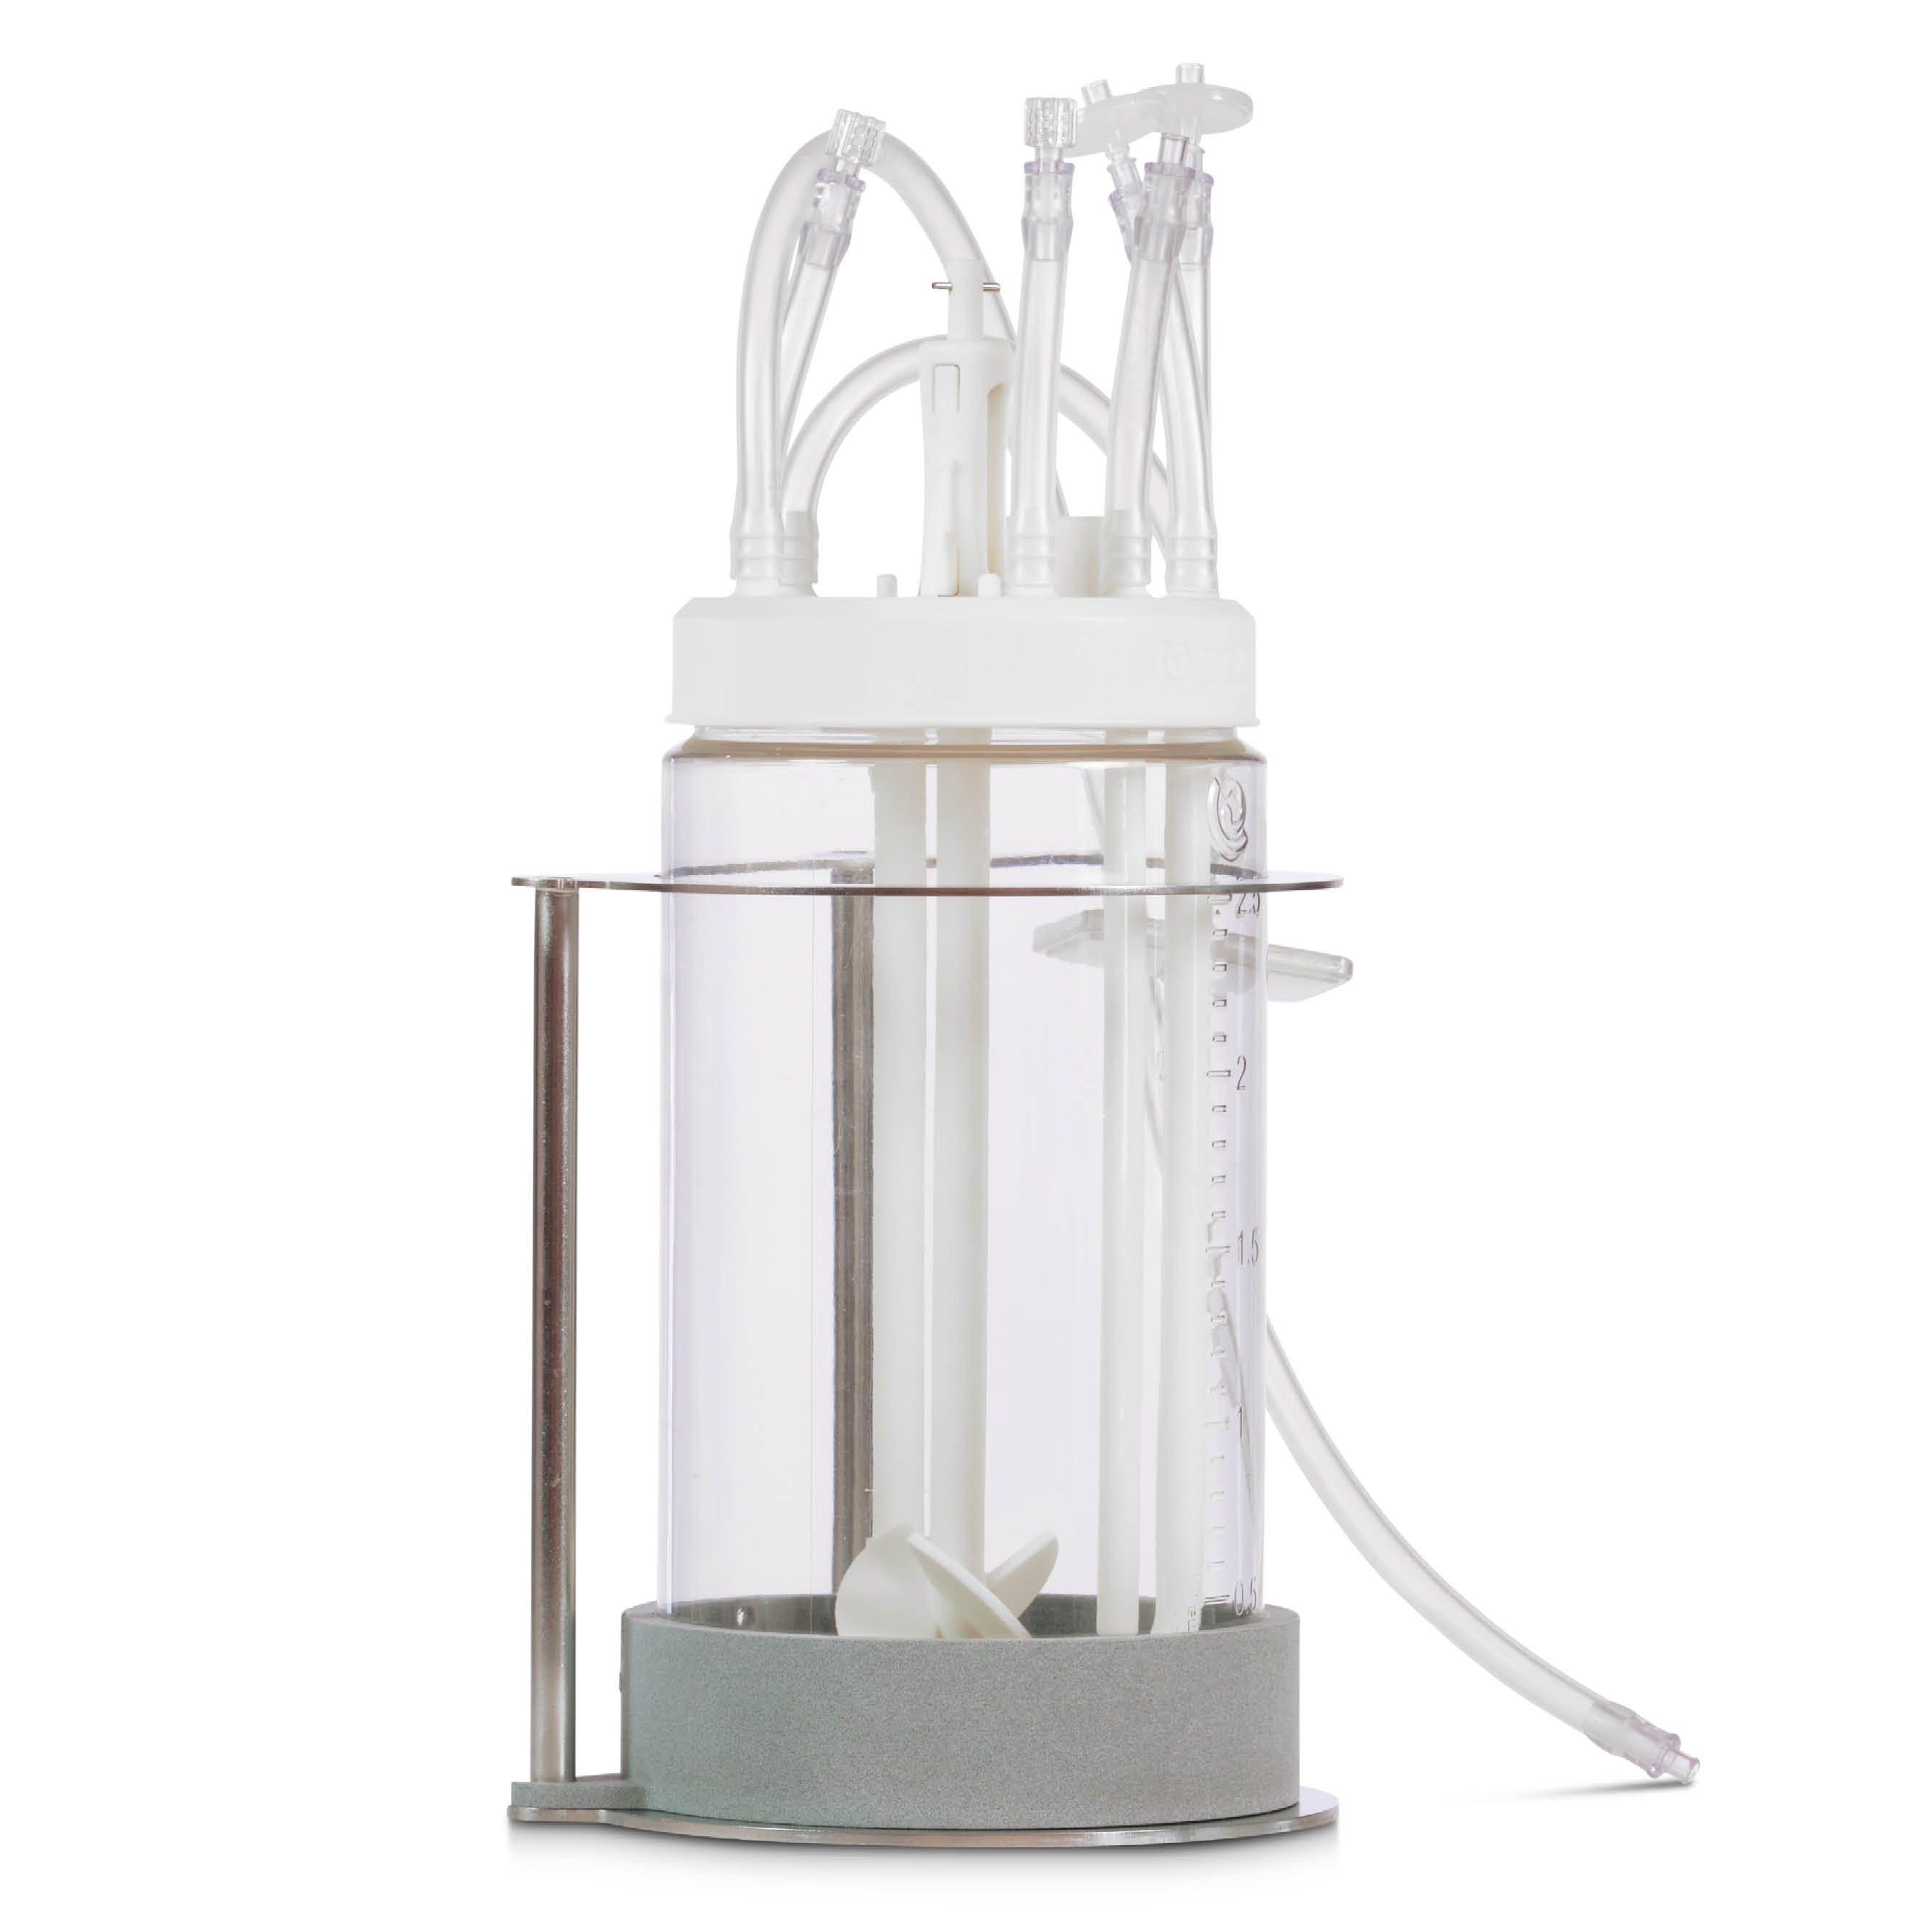 The 3 liter single-use bioreactor for clinical applications